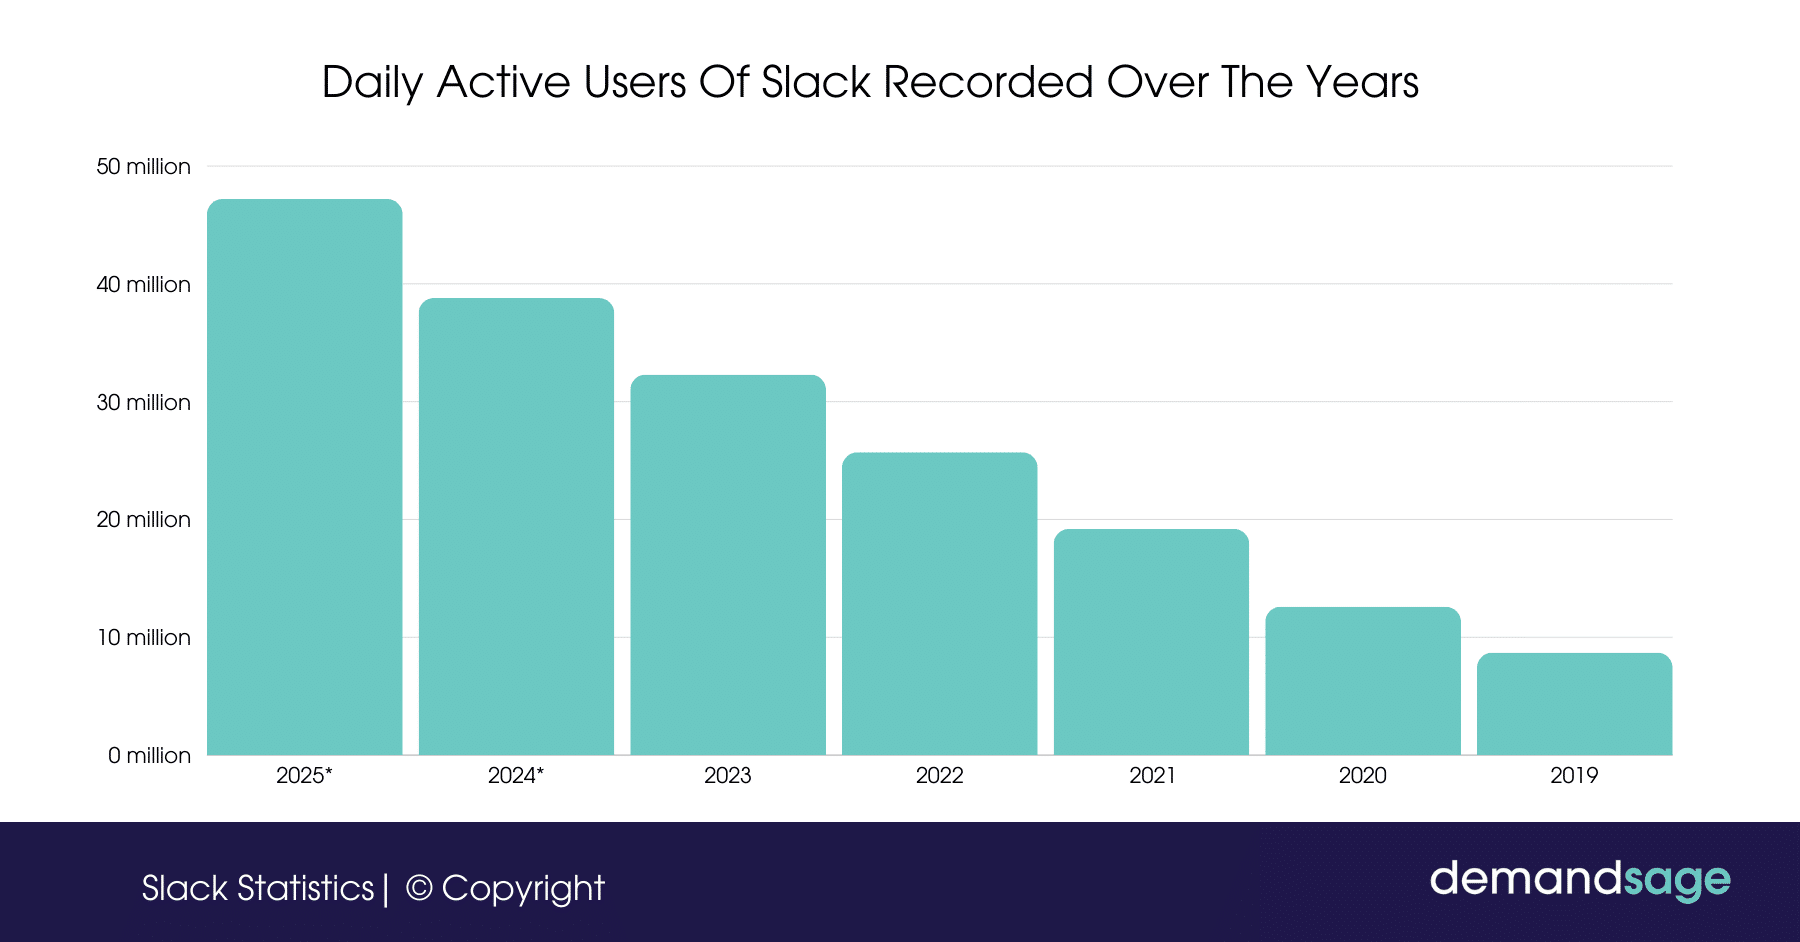 Daily Active Users Of Slack Recorded Over The Years